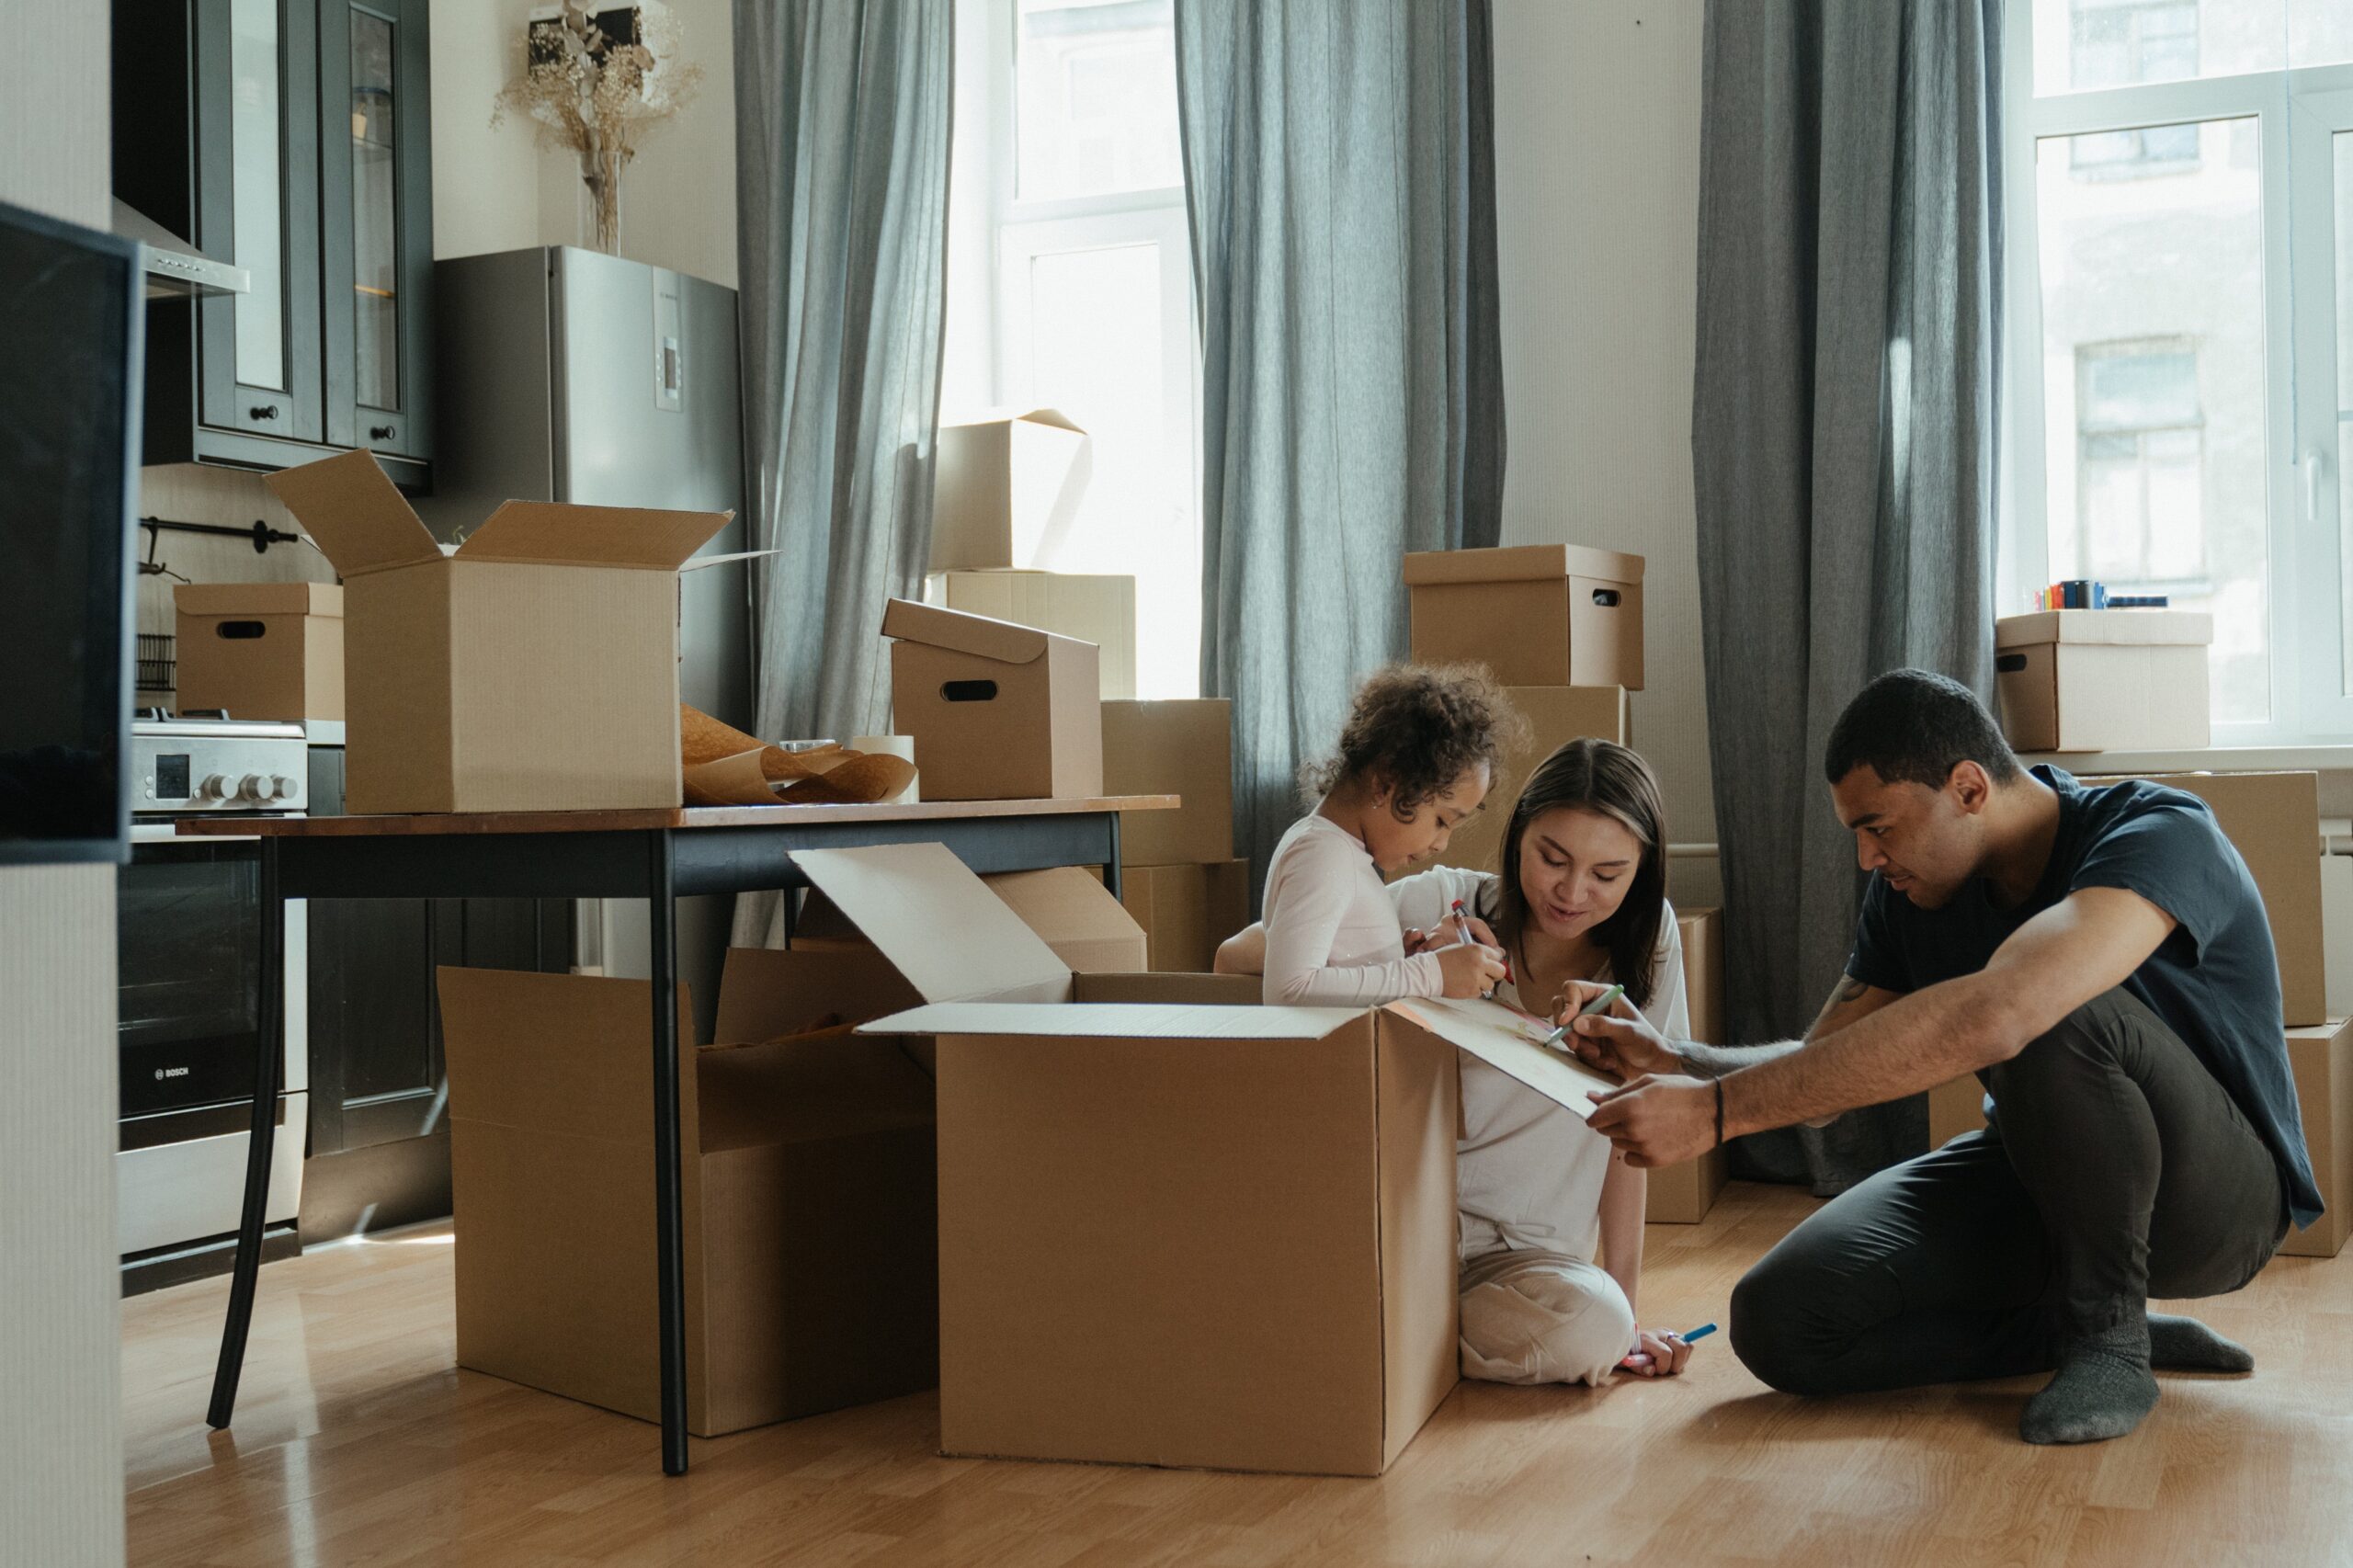 Photo by cottonbro studio: https://www.pexels.com/photo/family-unpacking-after-moving-4569340/